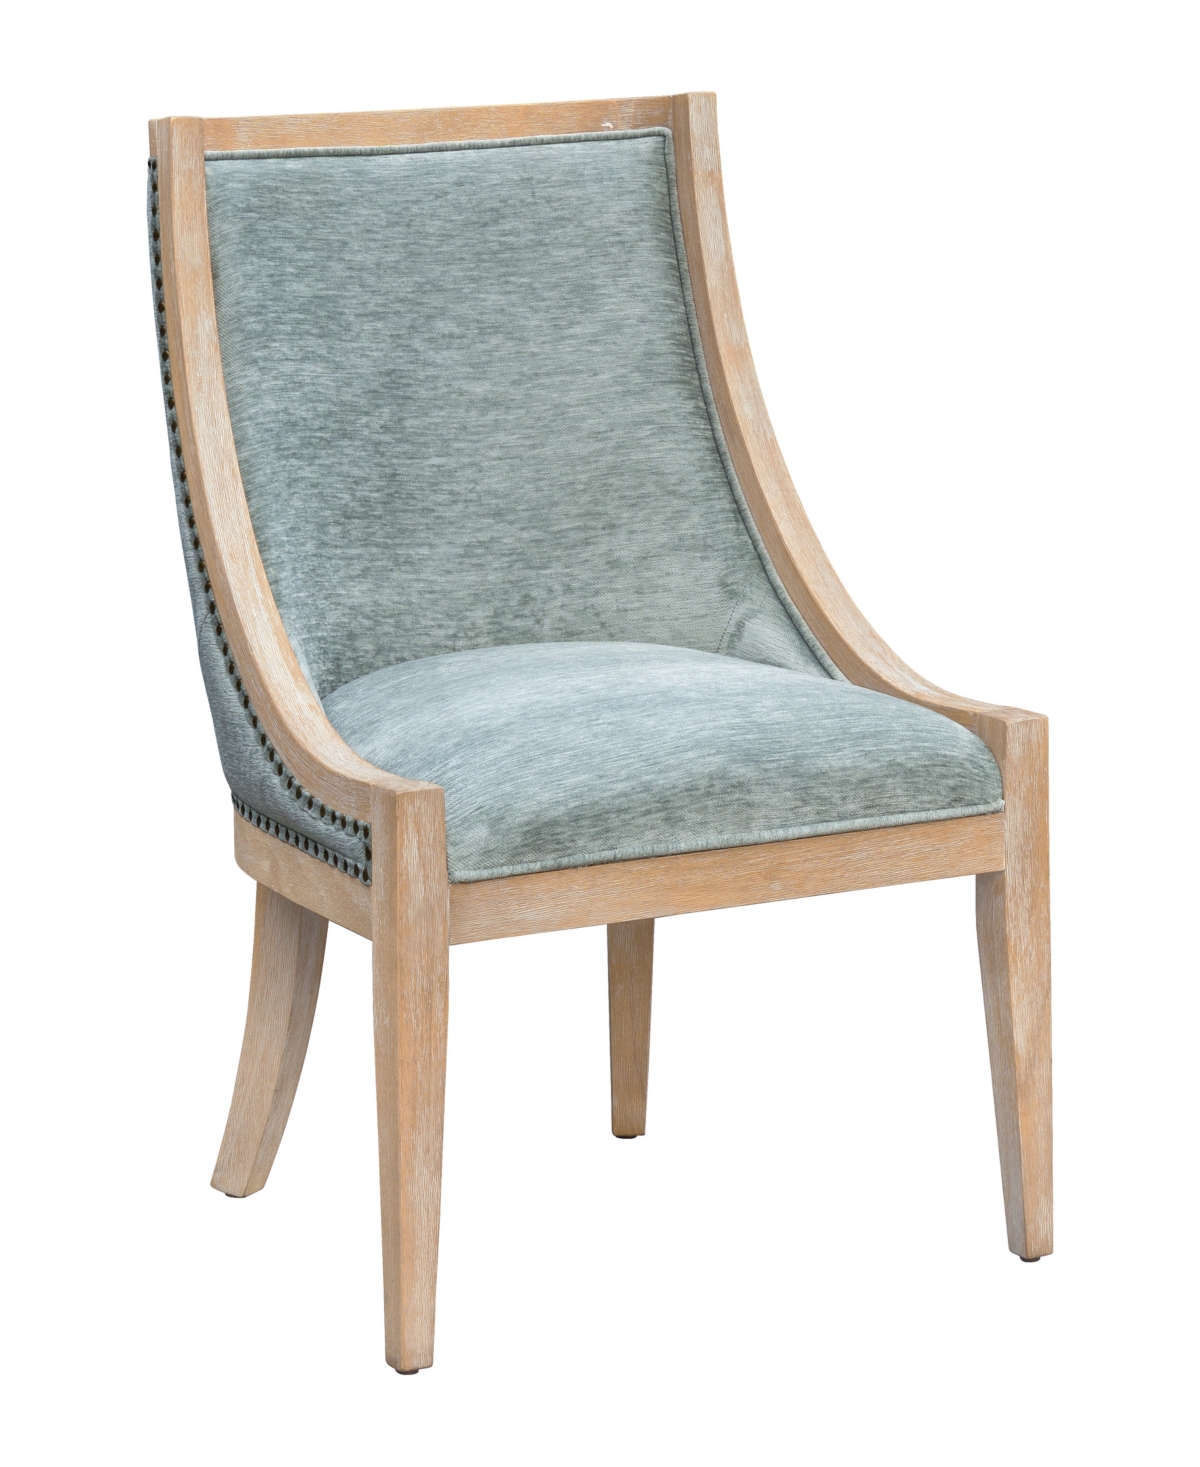 Martha Stewart Collection Elmcrest Upholstered Dining Chair With Nailhead Trim In Soft Green